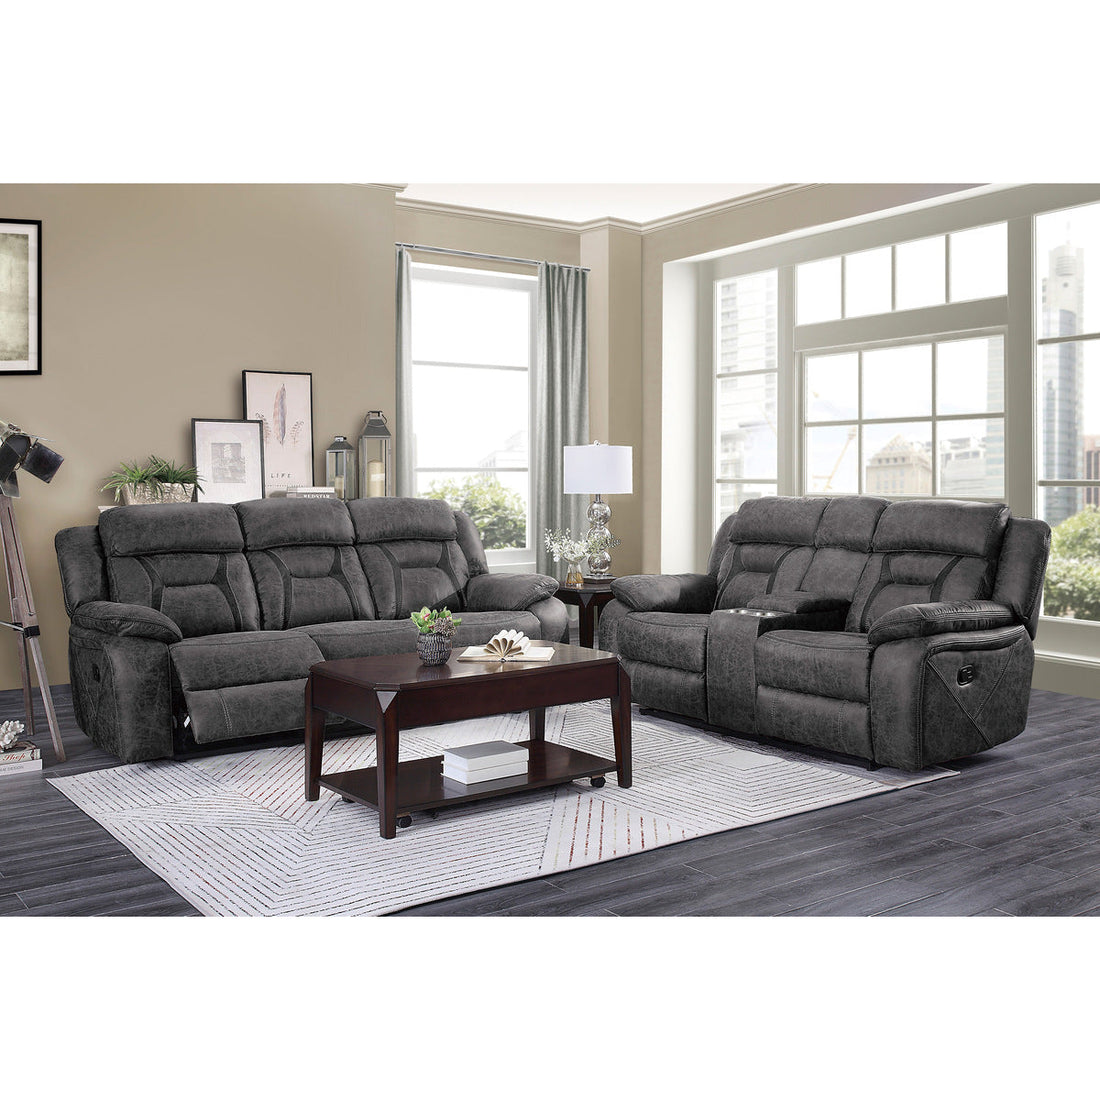 Madrona Hill Gray Double Reclining Living Room Set - SET | 9989GY-1 | 9989GY-2 | 9989GY-3 - Bien Home Furniture &amp; Electronics